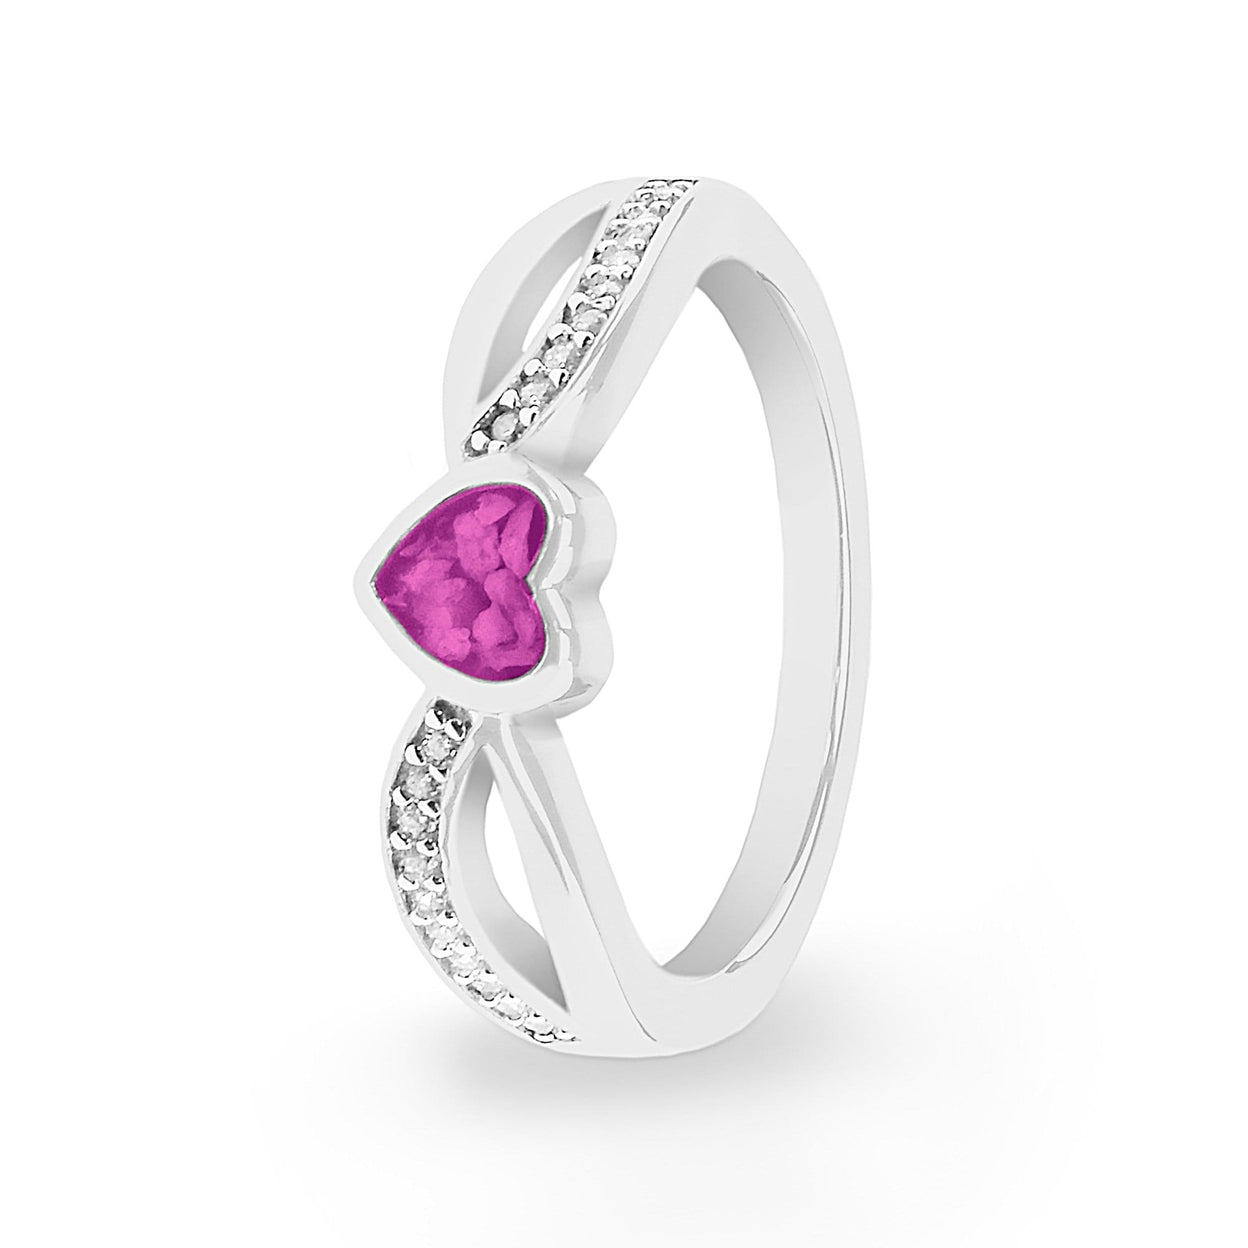 Load image into Gallery viewer, EverWith™ Ladies Truelove Memorial Ashes Ring with Swarovski Crystals - EverWith Memorial Jewellery - Trade